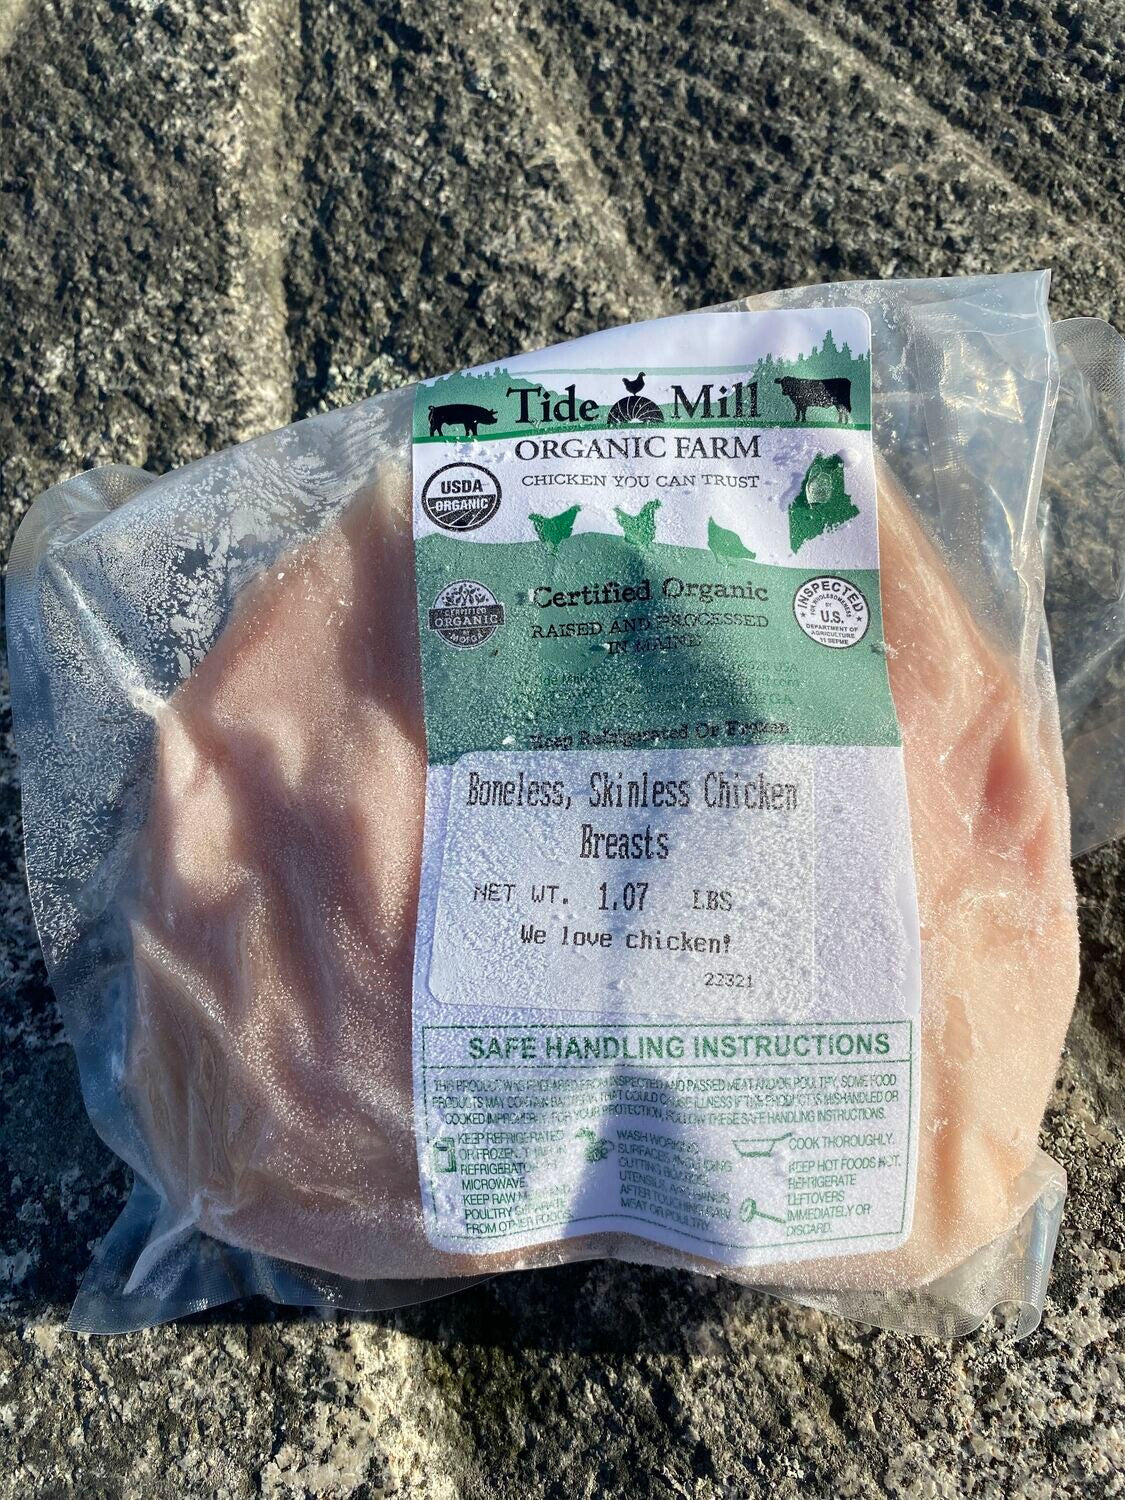 A package of boneless skinless organic chicken breasts